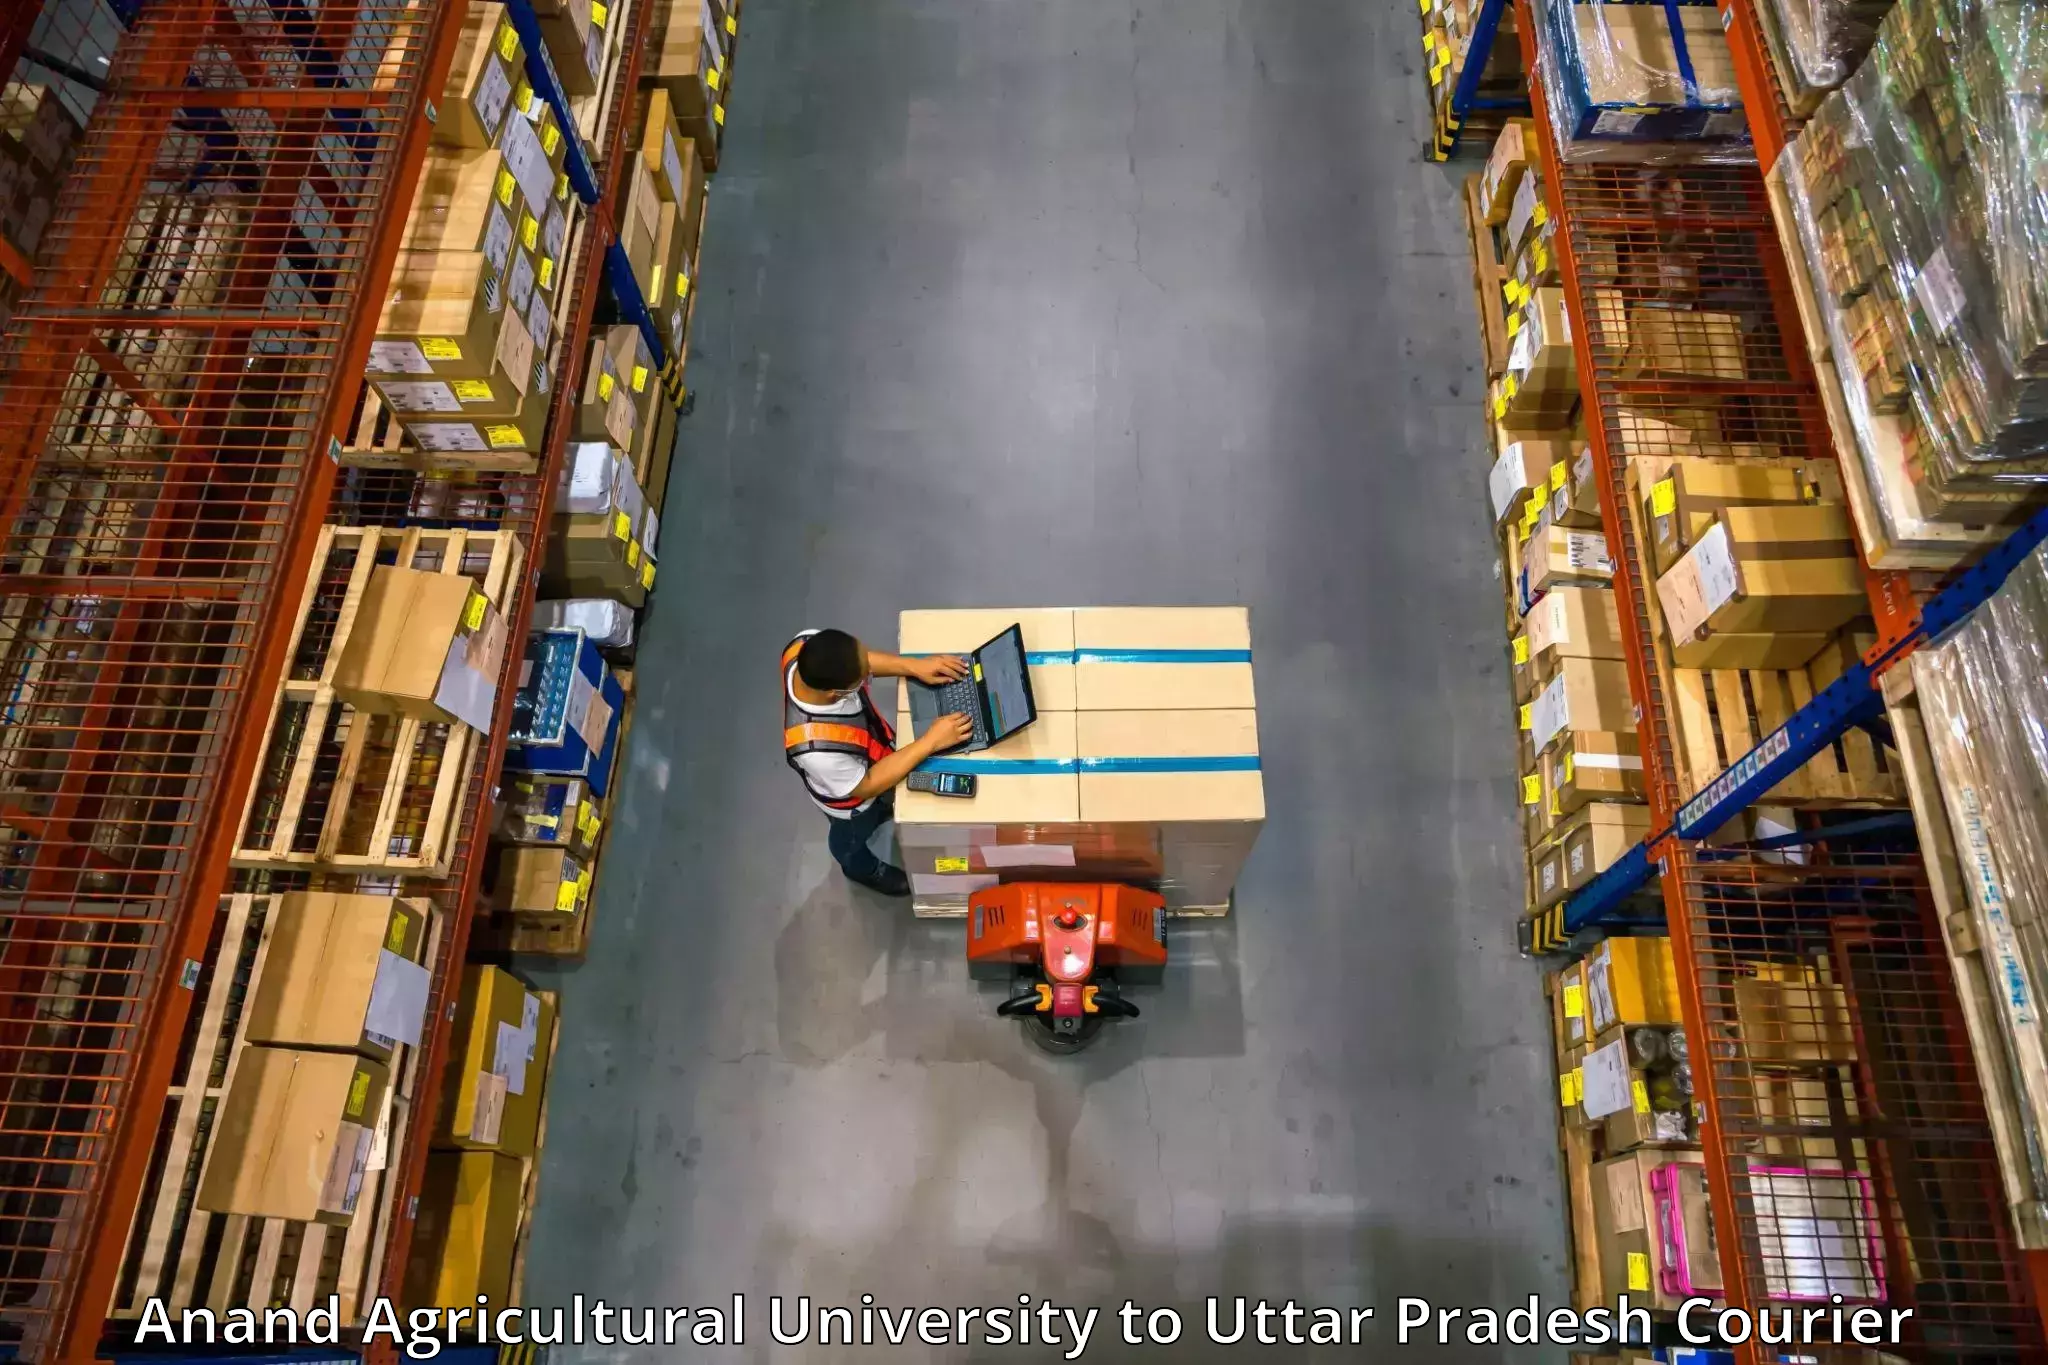 Quality furniture shipping Anand Agricultural University to Aligarh